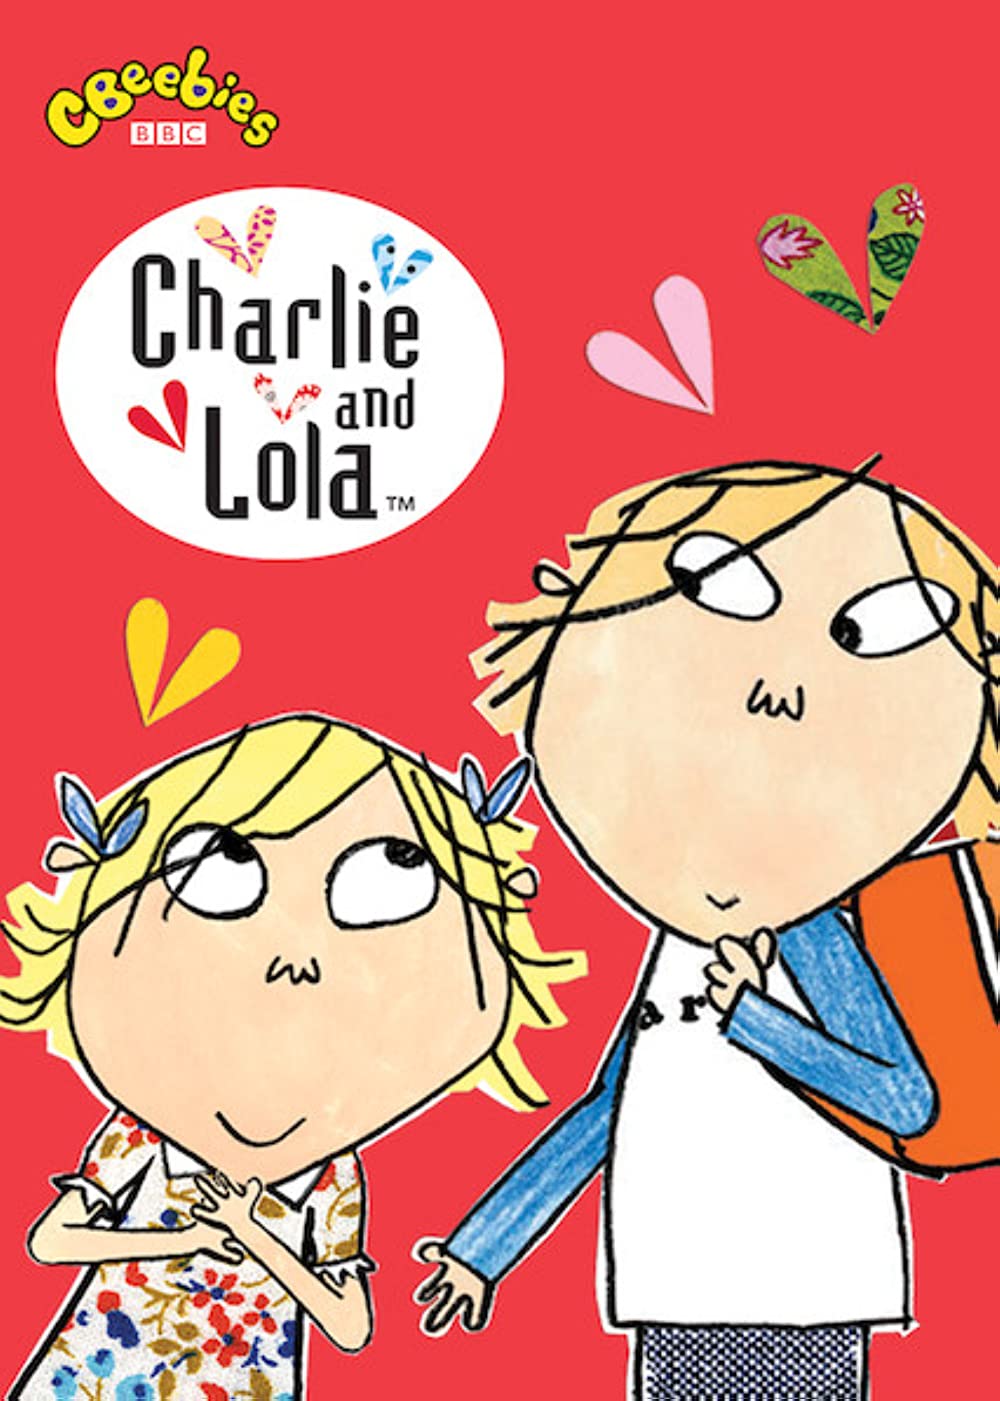 Download-charlie-and-lola-font